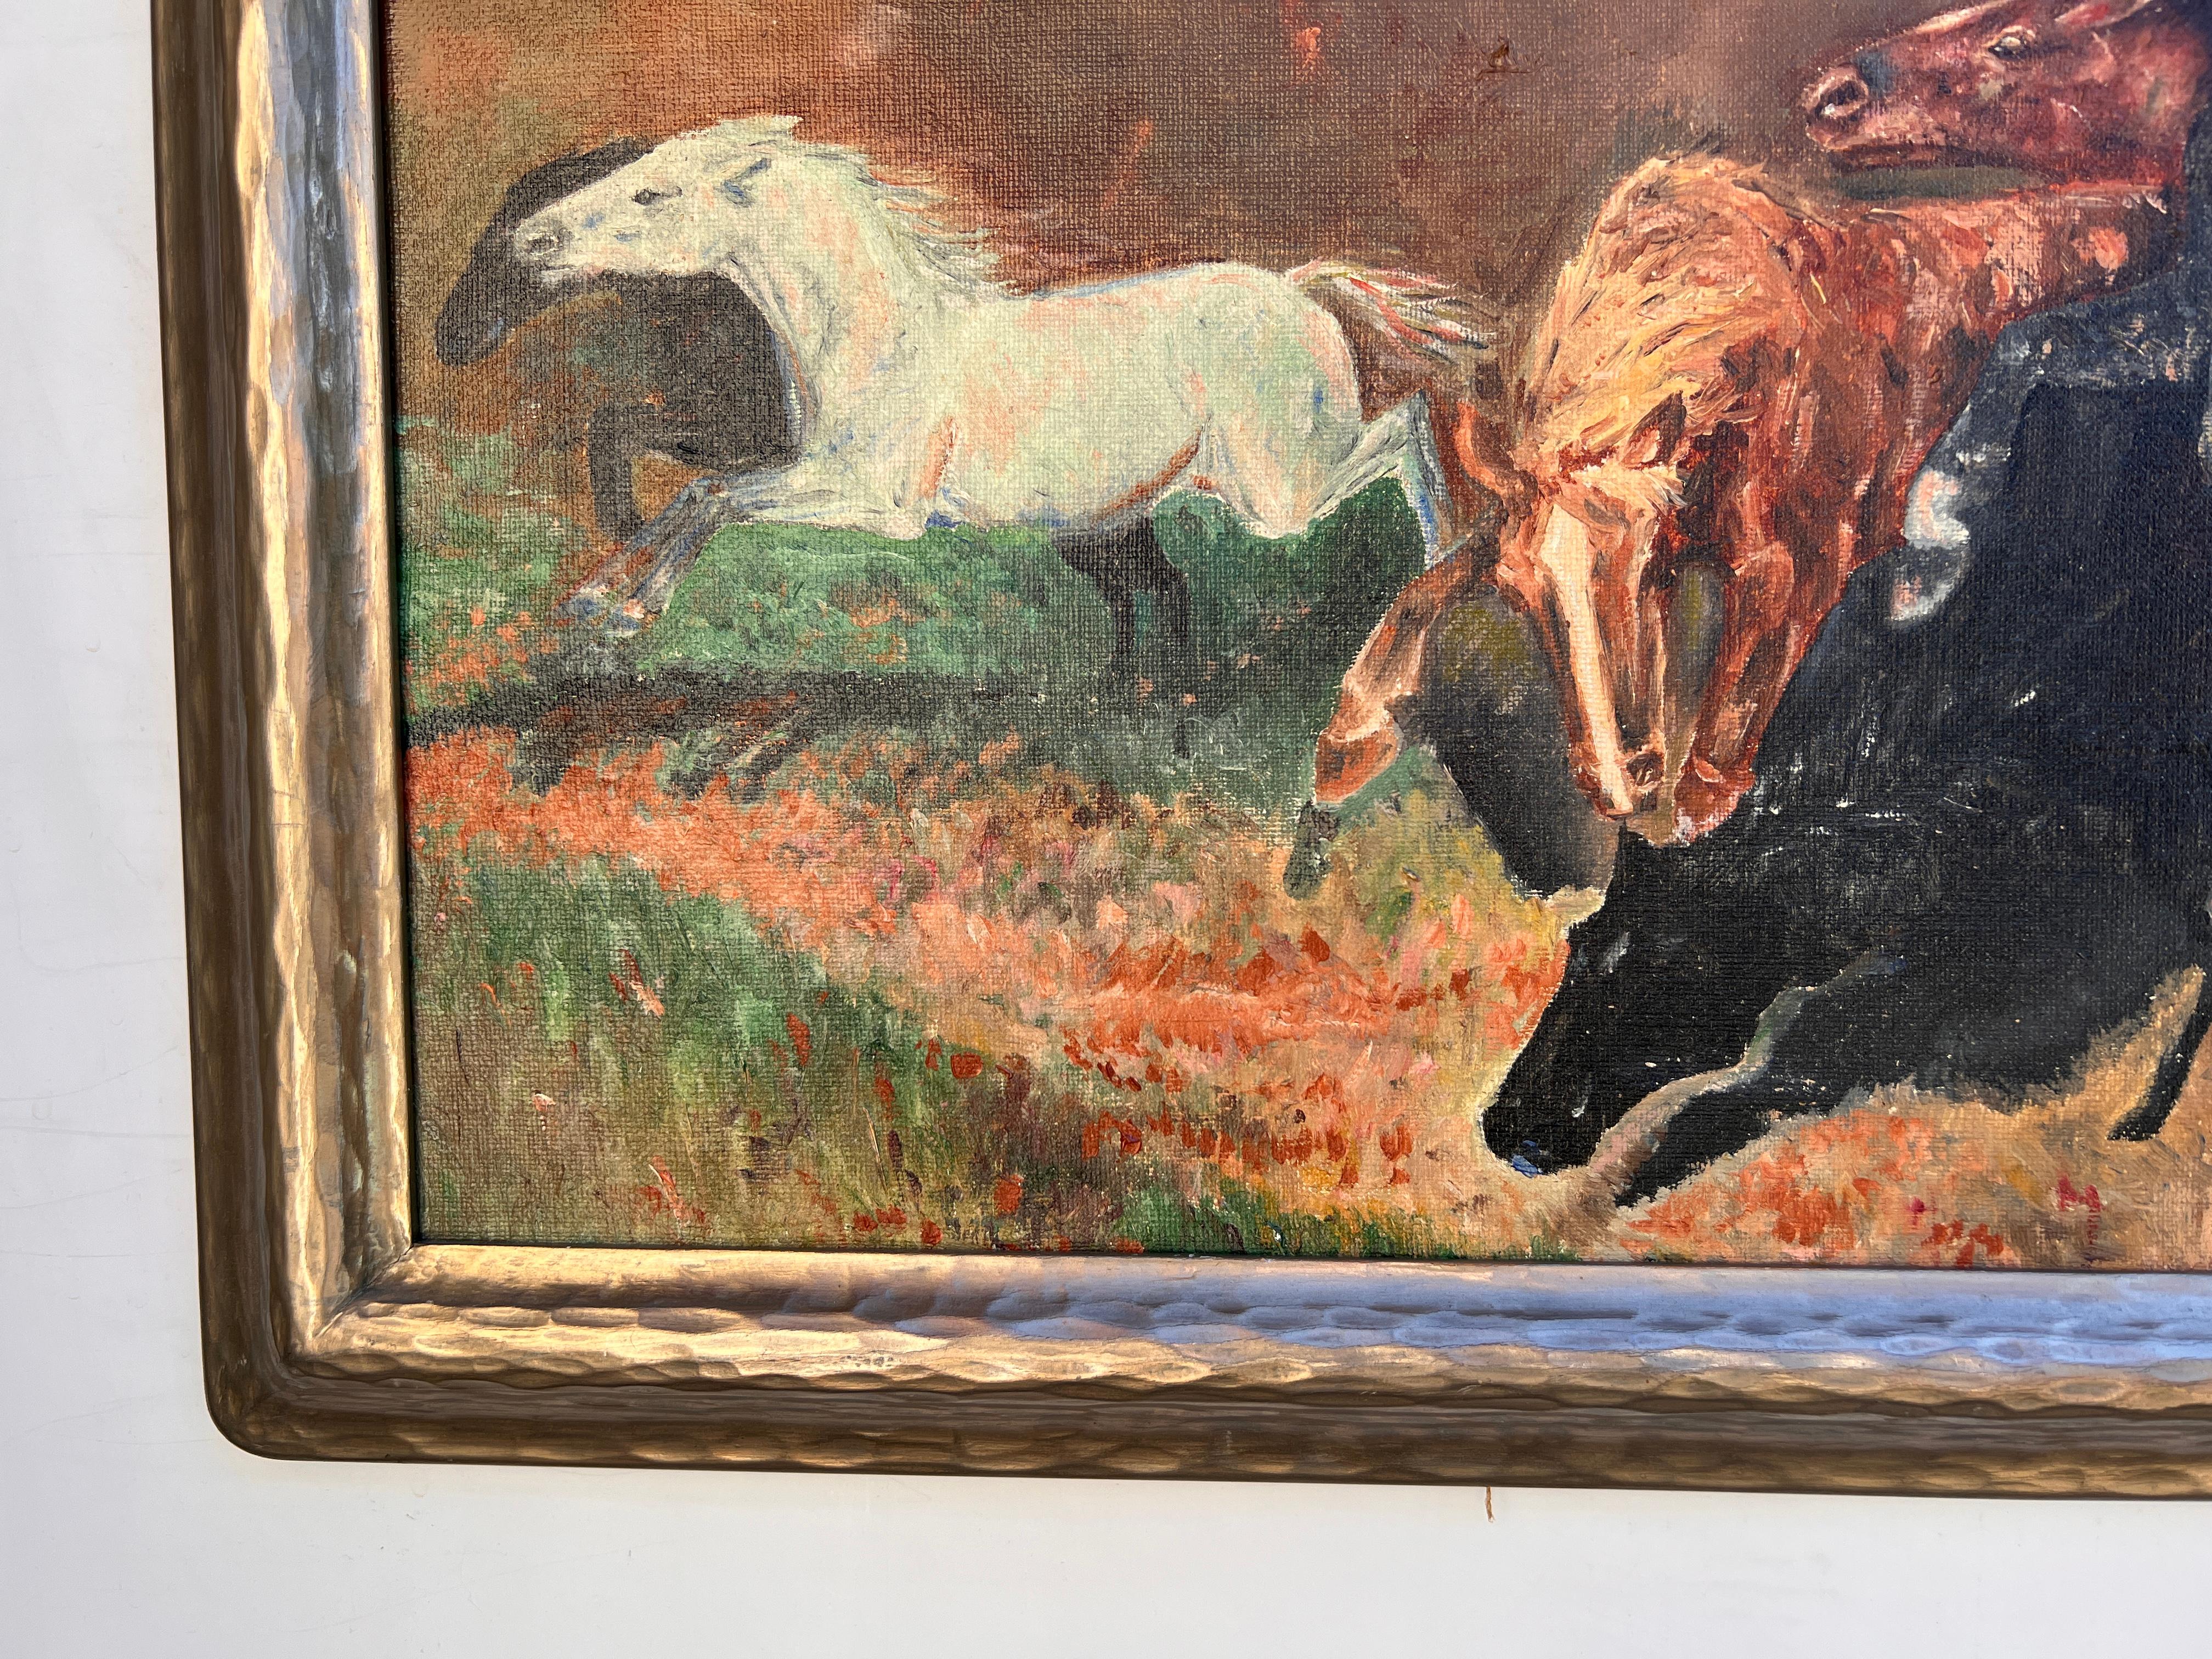 Up for sale is an impressive vintage oil painting on canvas depicting a herd of wild horses.

Signed  and dated in the lower-right corner J.FAY '43

Nicely framed. 

Good vintage condition.

Dimensions: 27.5